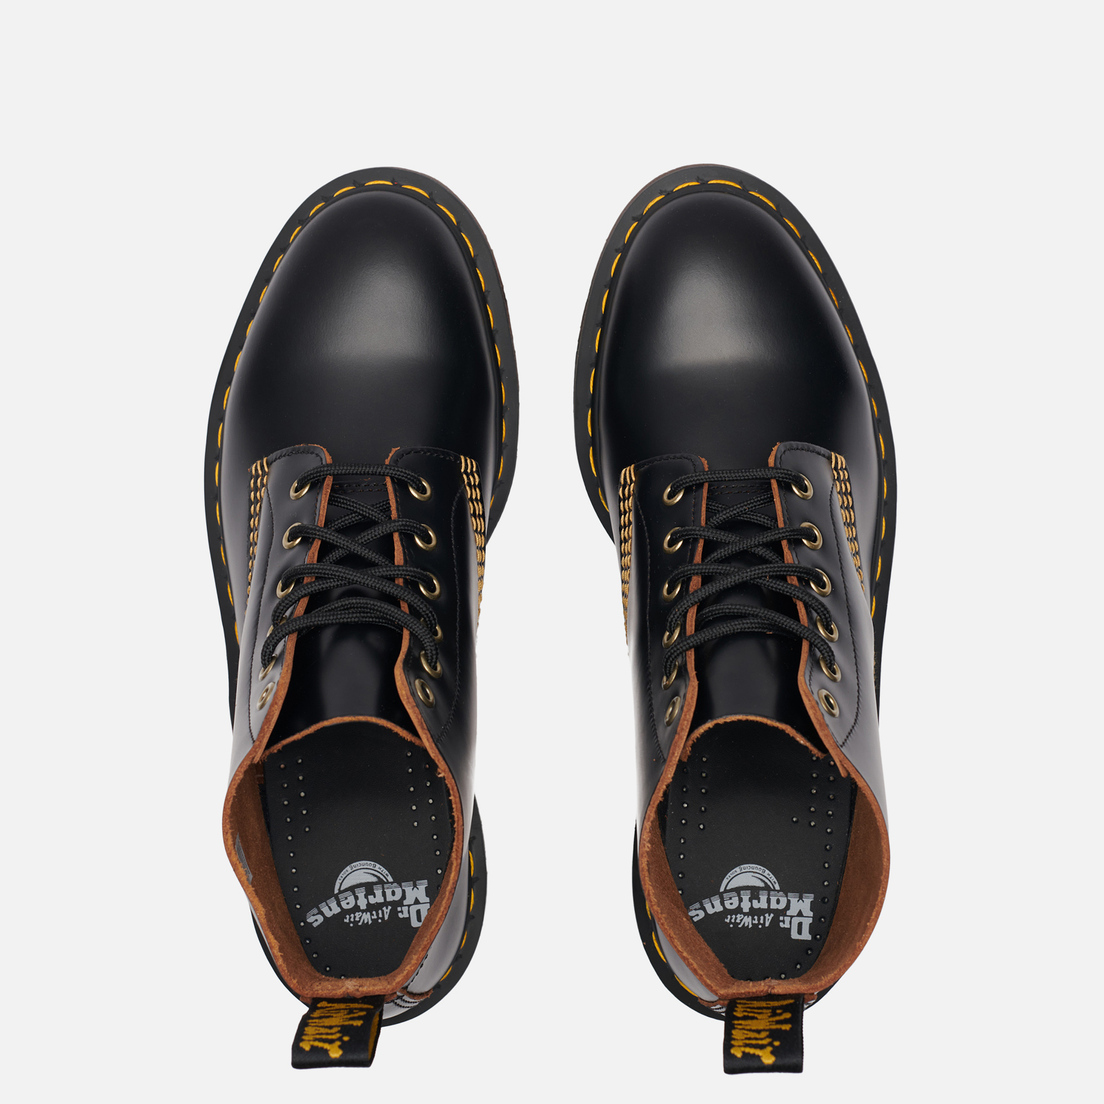 Dr. Martens Мужские ботинки 101 Archive Vintage Smooth